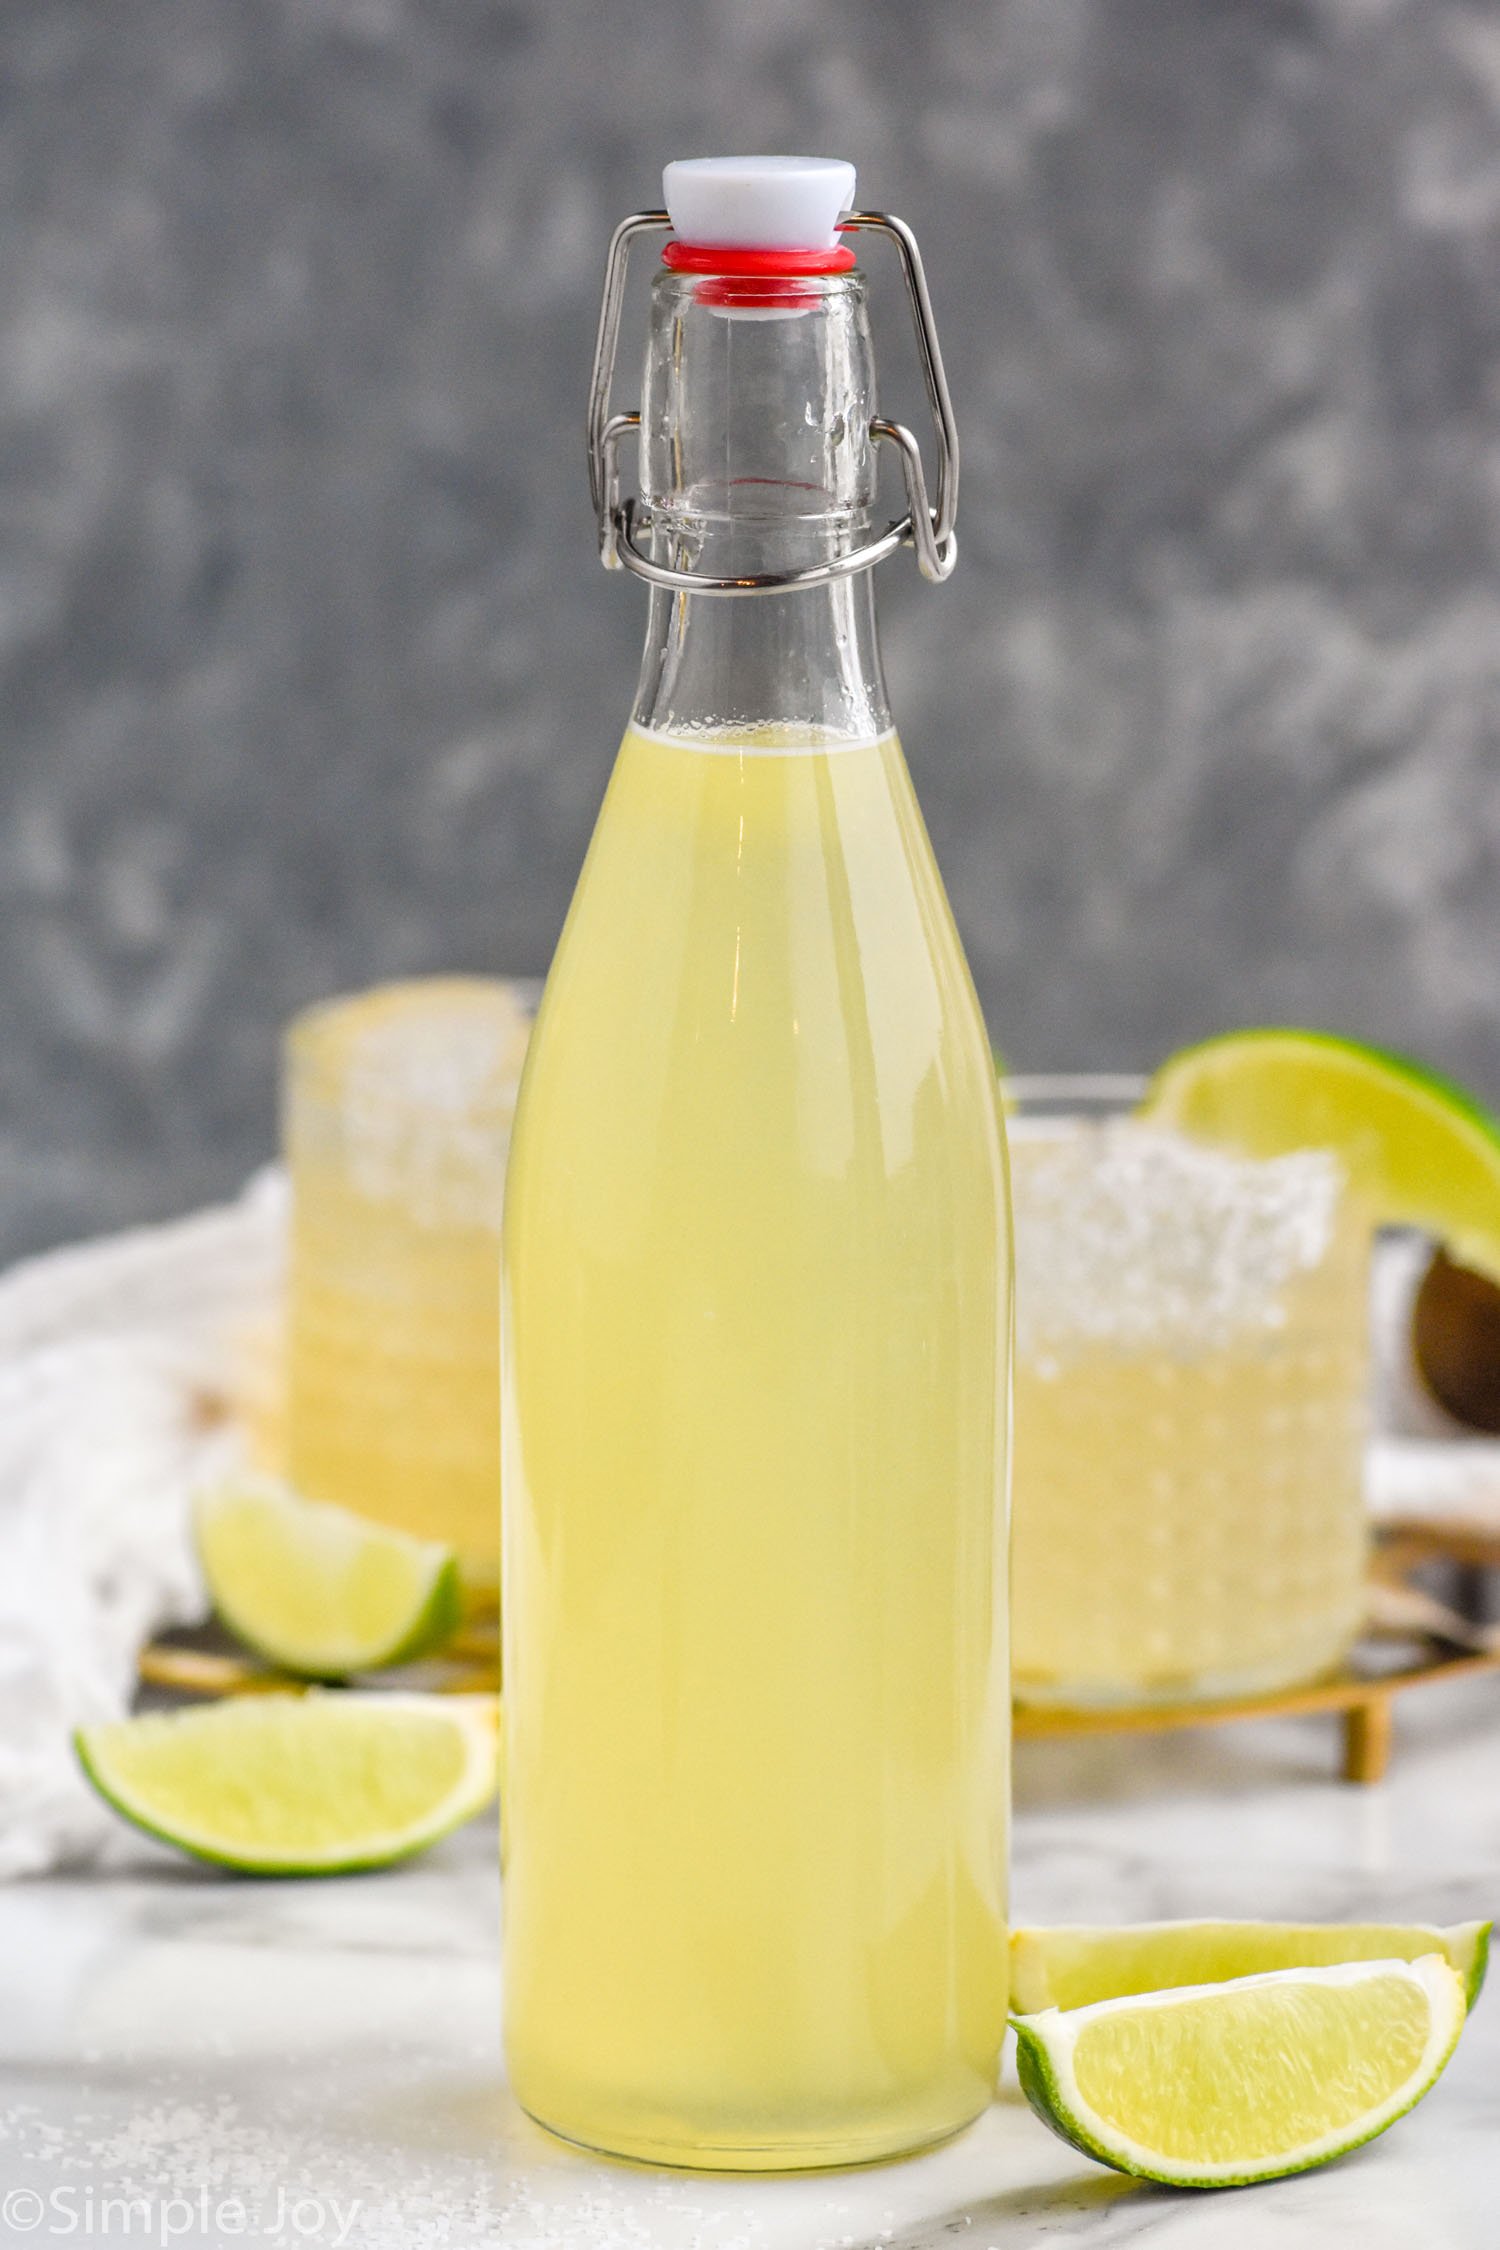 Bottle of Margarita Mix with lime slices beside